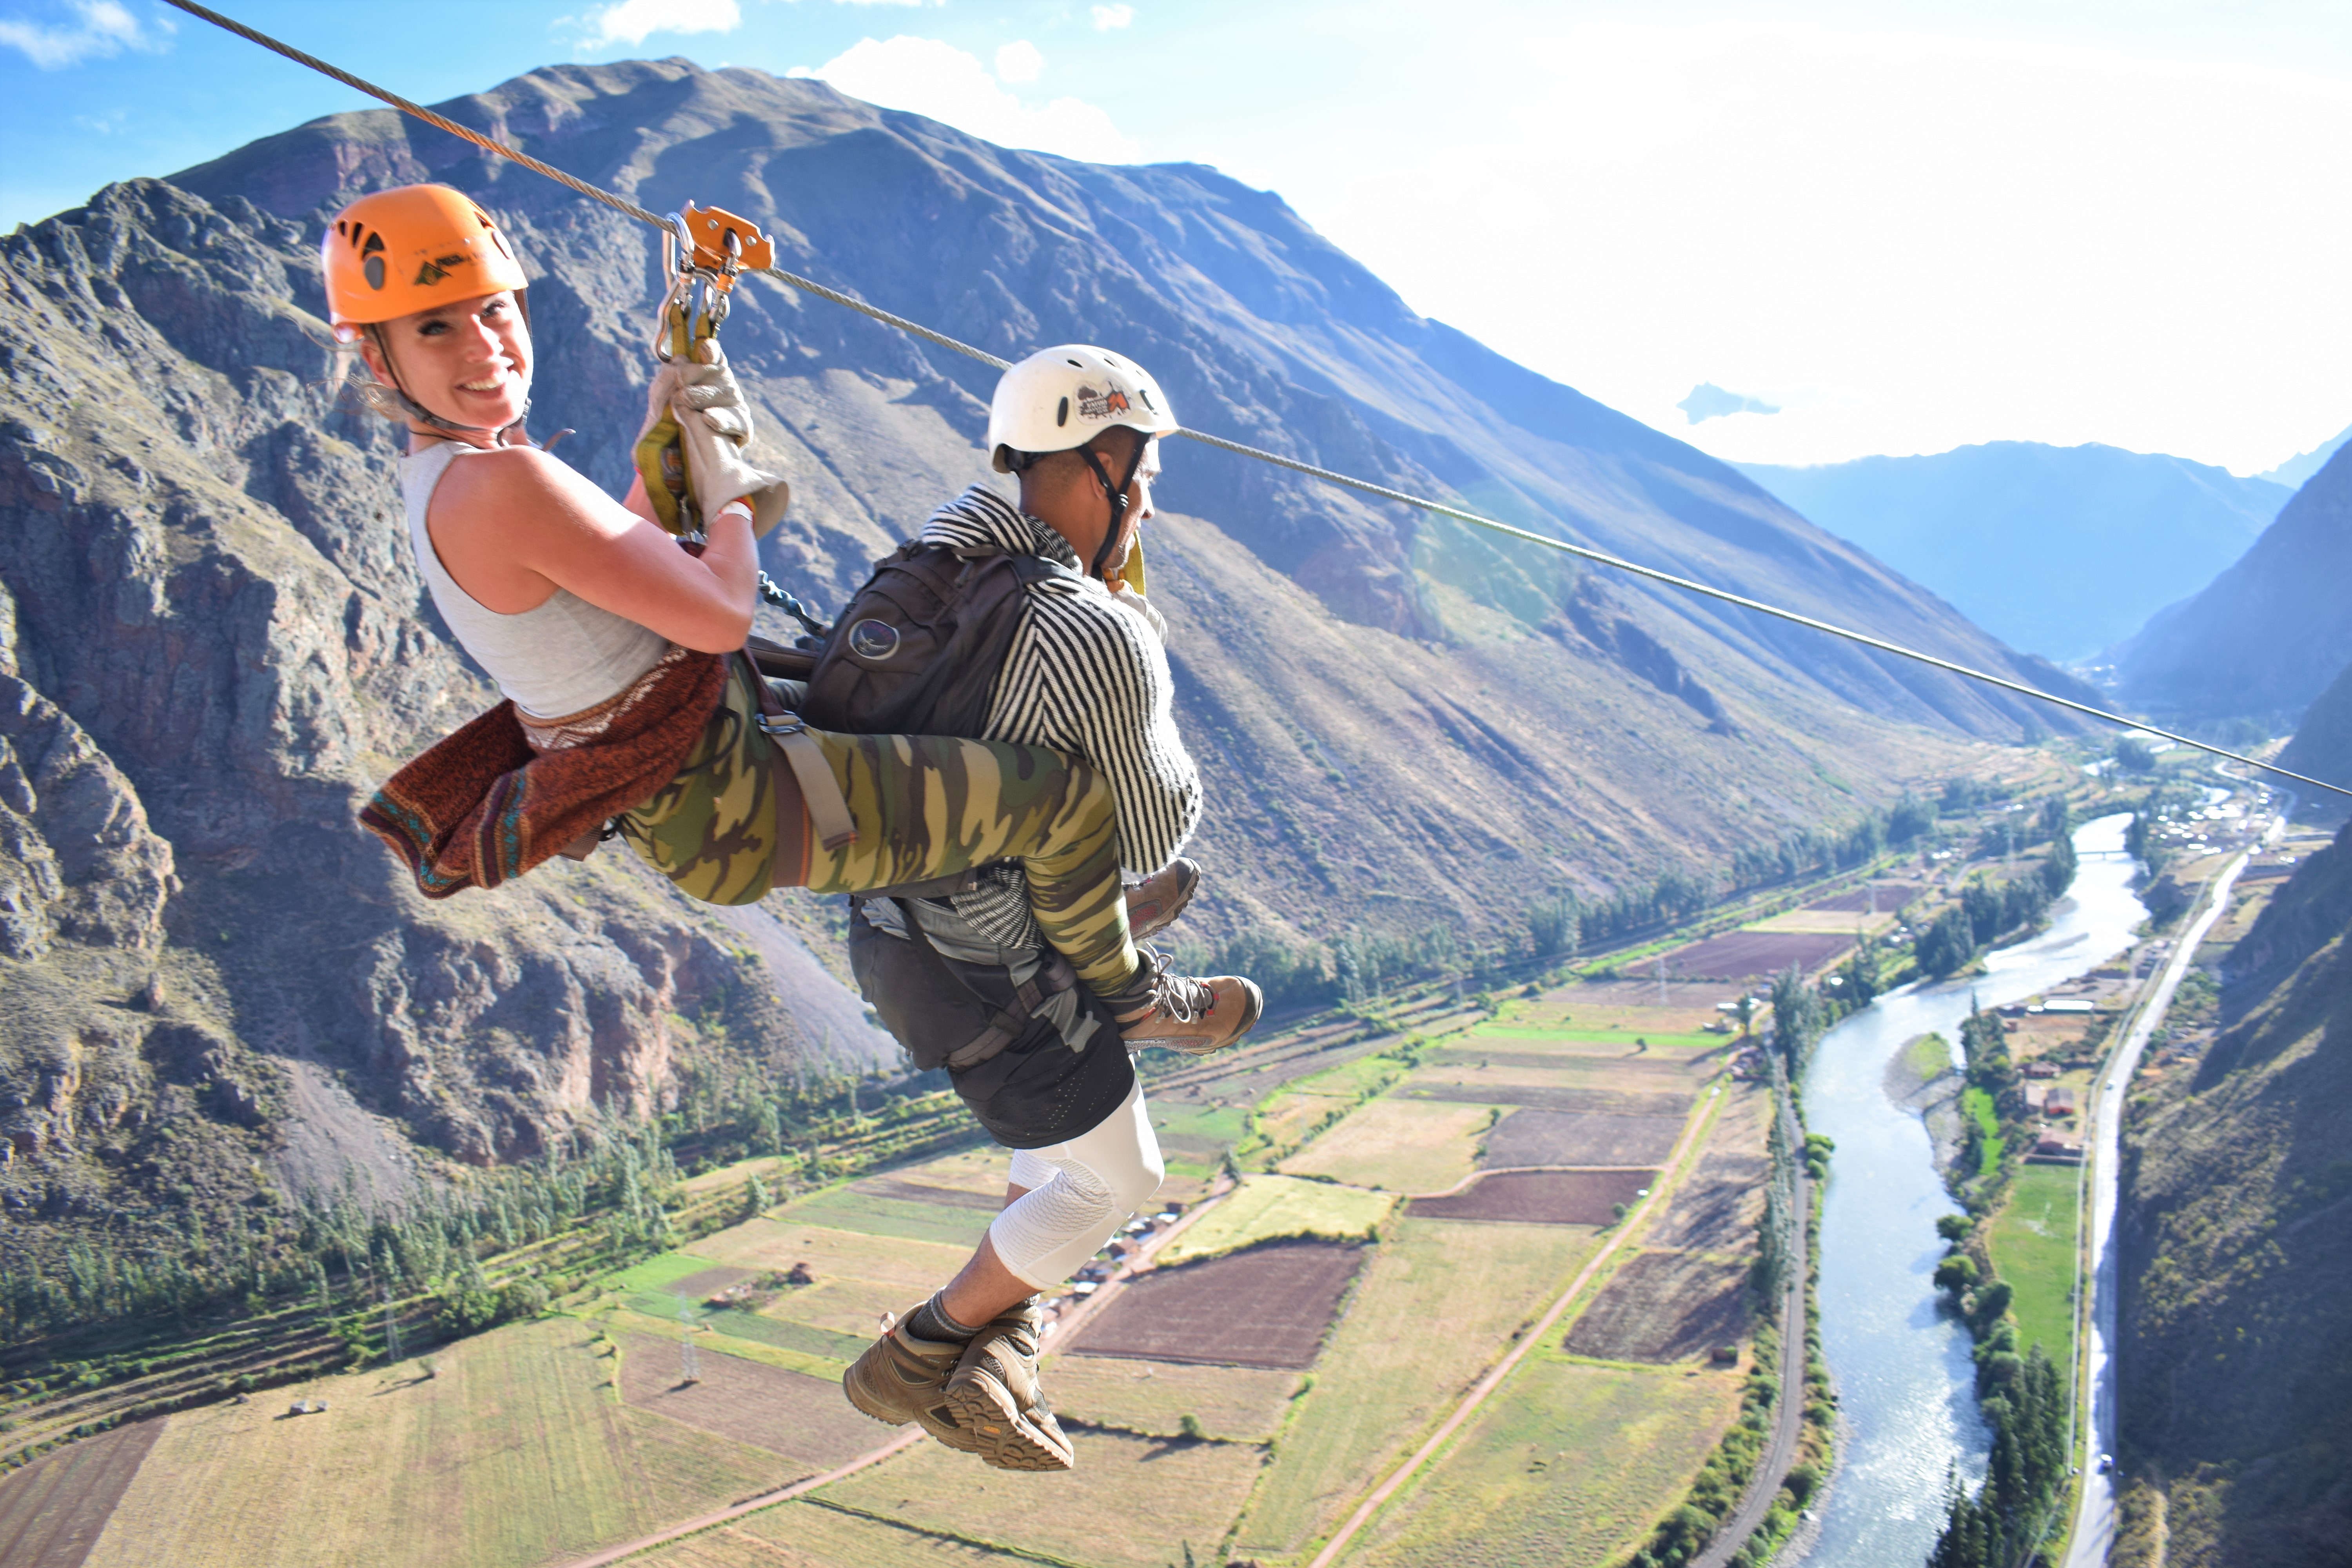 Branden Collinsworth and Markie Henderson zip line over the Sacred Valley of the Incas.